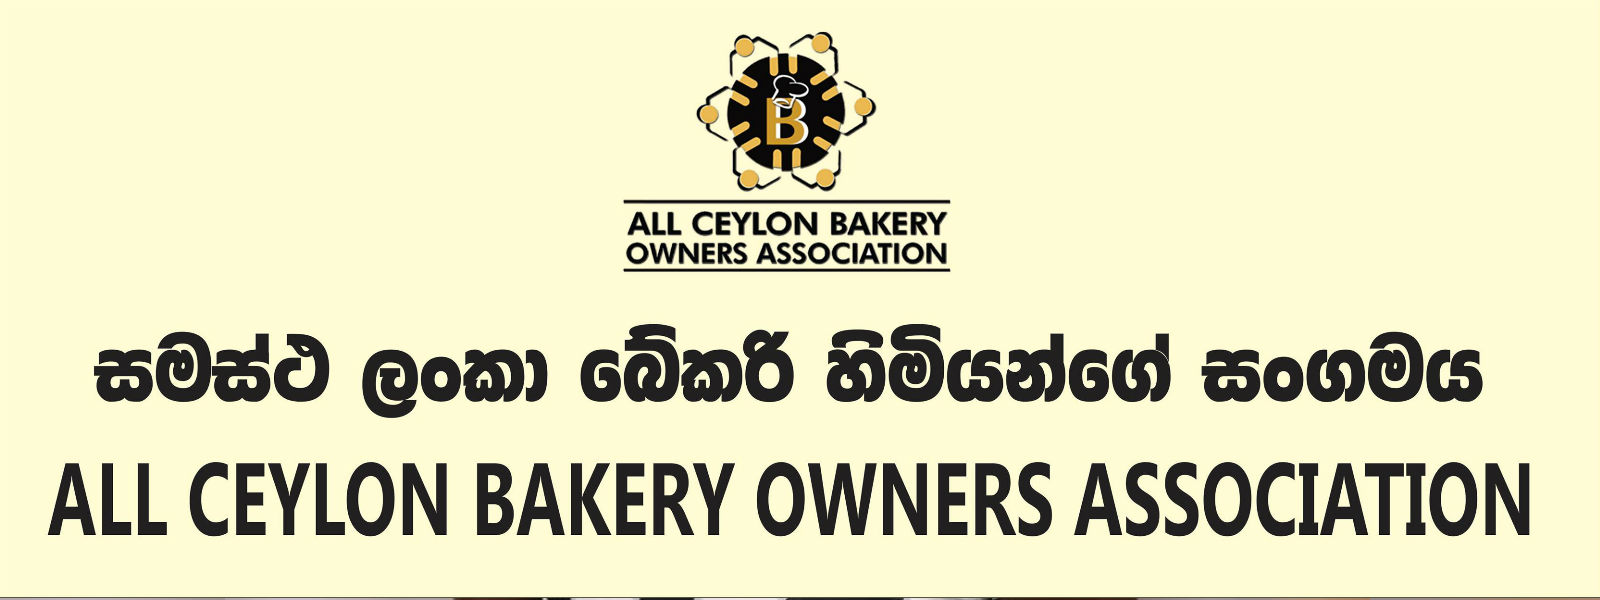 Bakery product prices to be dropped